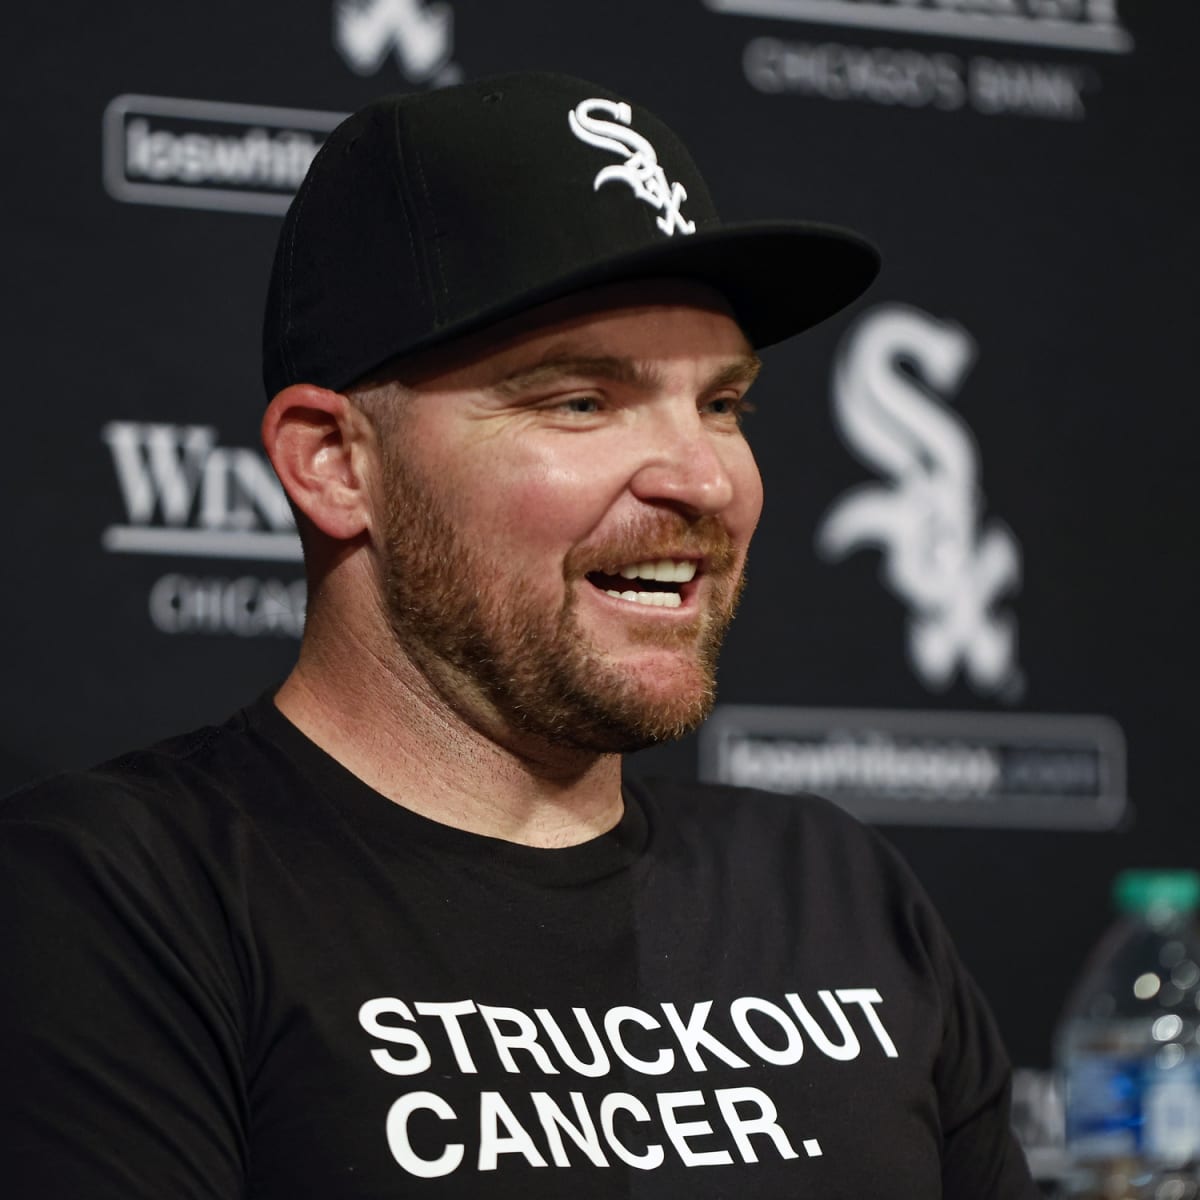 Liam Hendriks returns to the mound after cancer battle